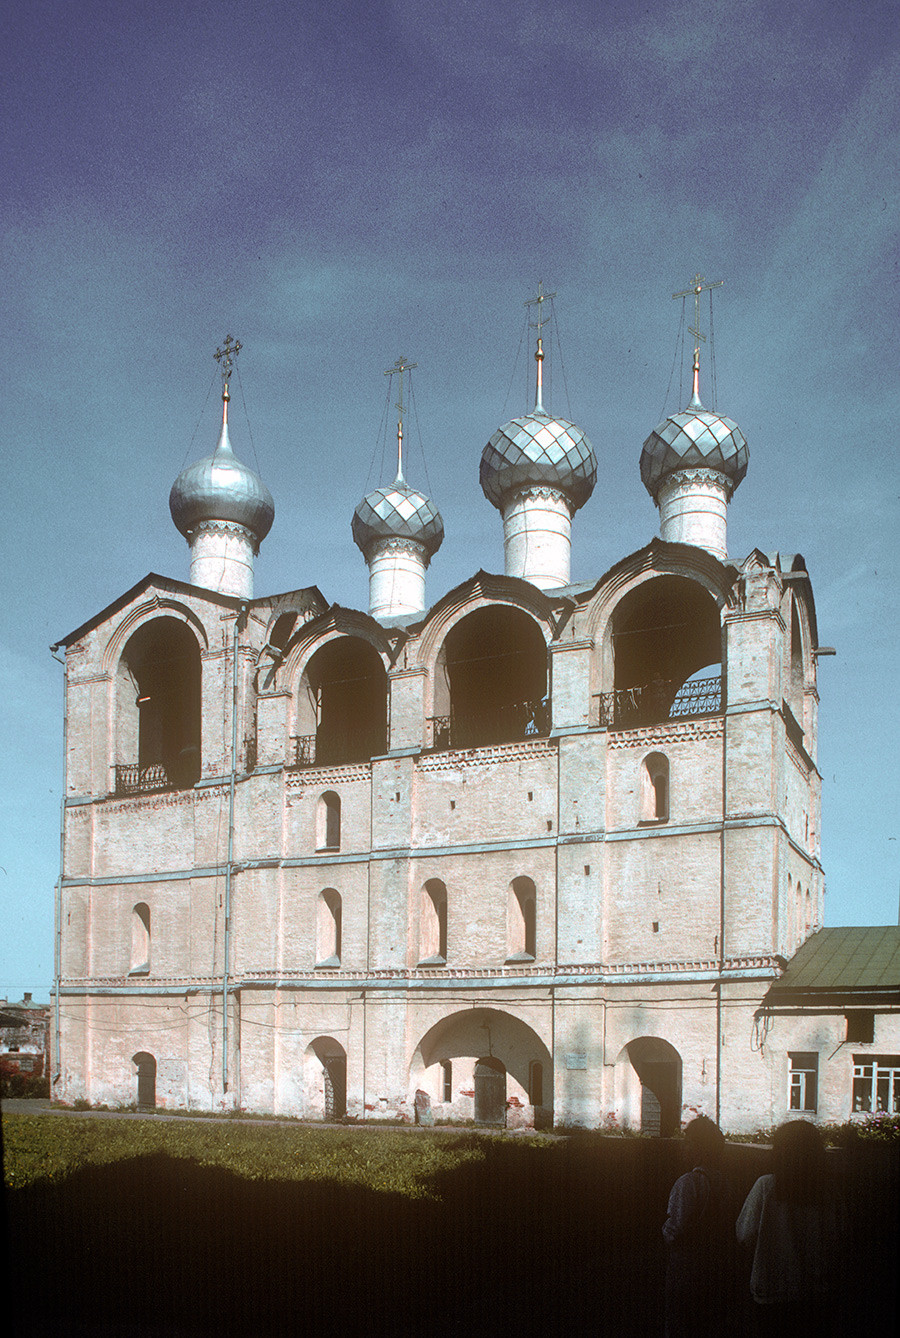 Cathedral belfry. Southwest view. August 21, 1988.